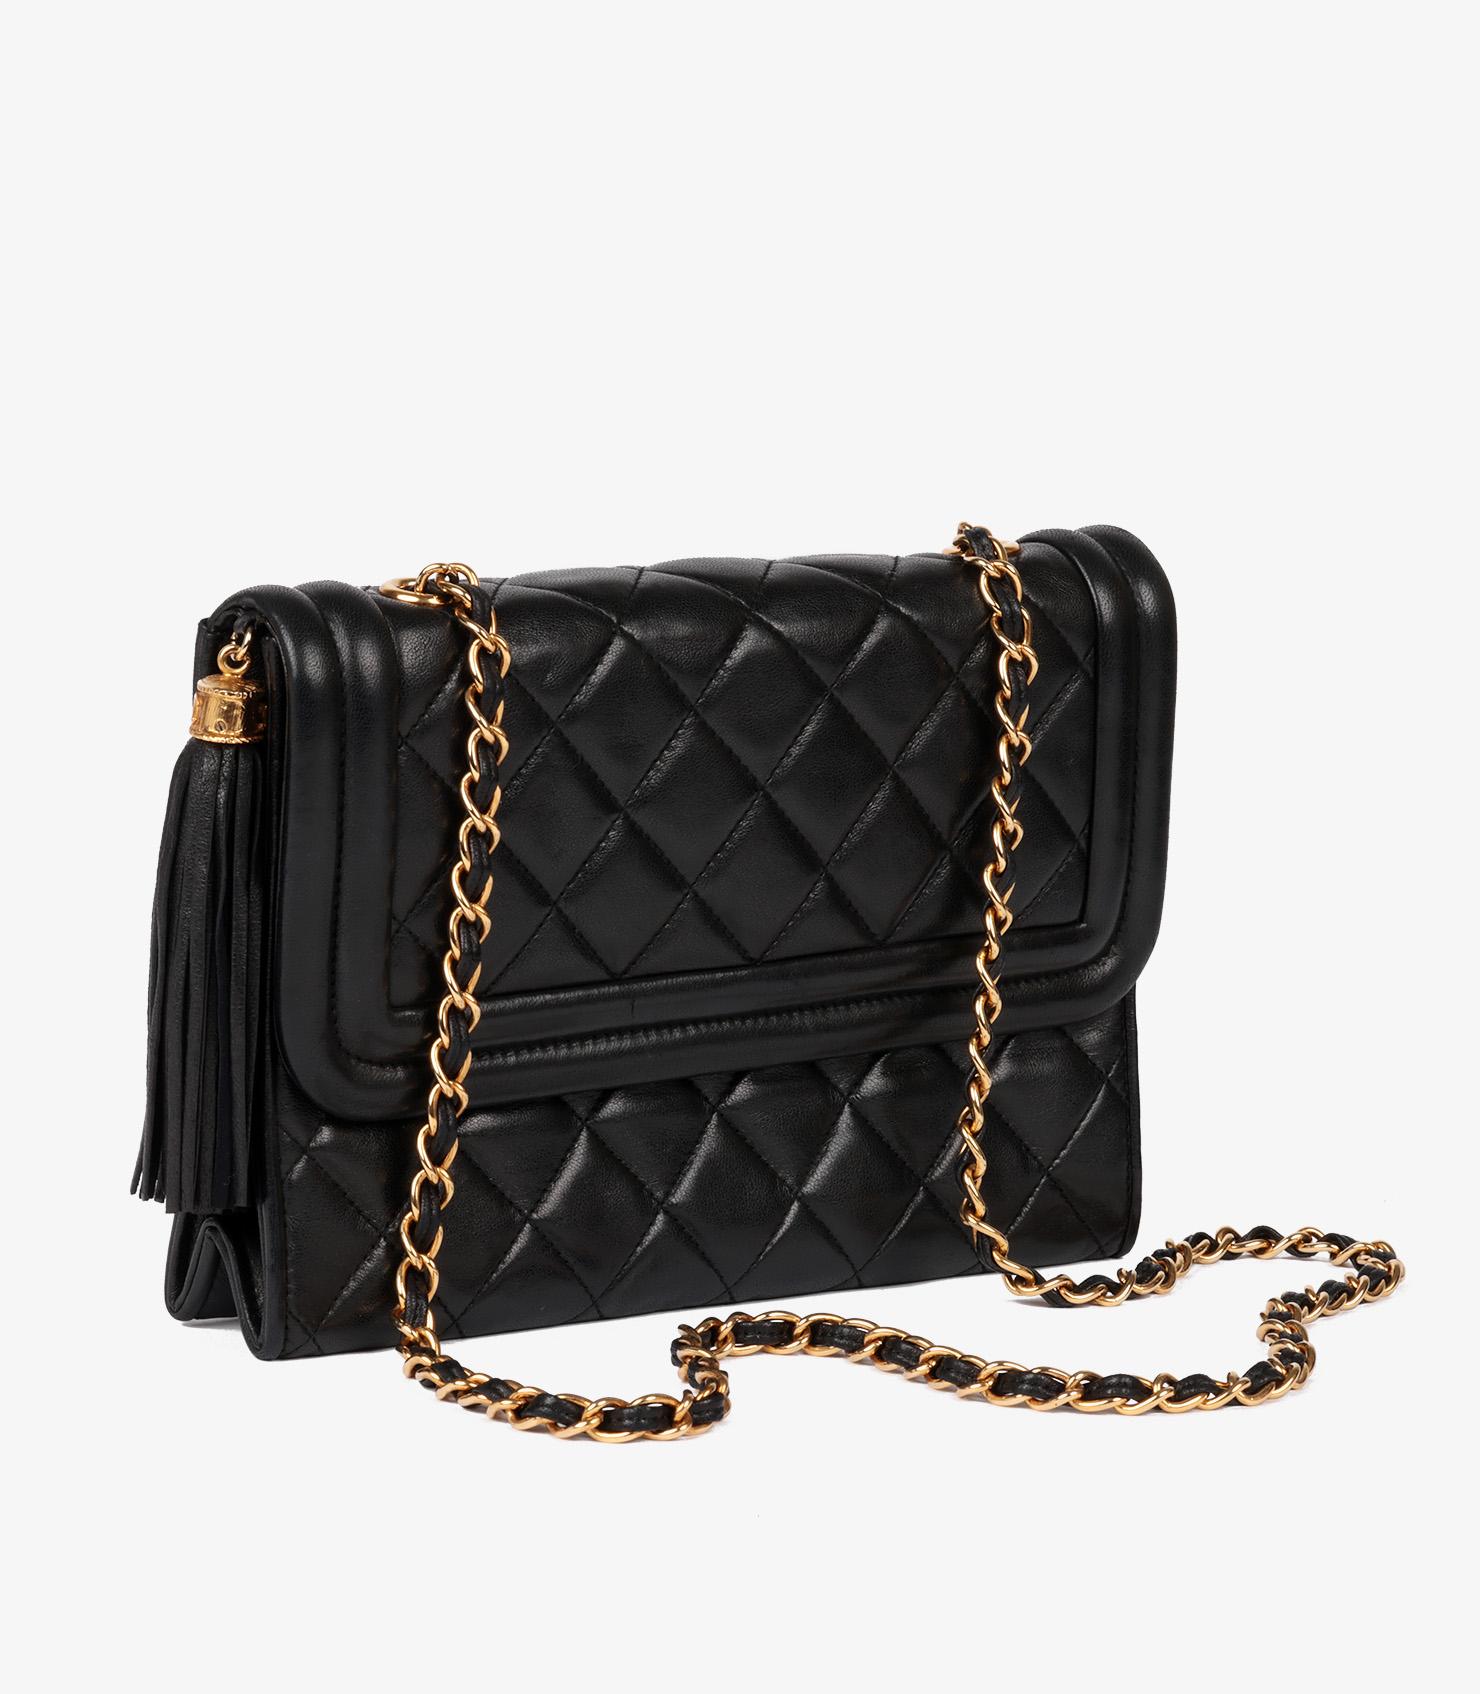 Chanel Black Quilted Lambskin Vintage Fringe Small Timeless Single Flap Bag

Brand- Chanel
Model- Small Fringe Timeless Single Flap Bag
Product Type- Shoulder
Serial Number- 10*****
Age- Circa 1989
Accompanied By- Chanel Dust Bag, Authenticity